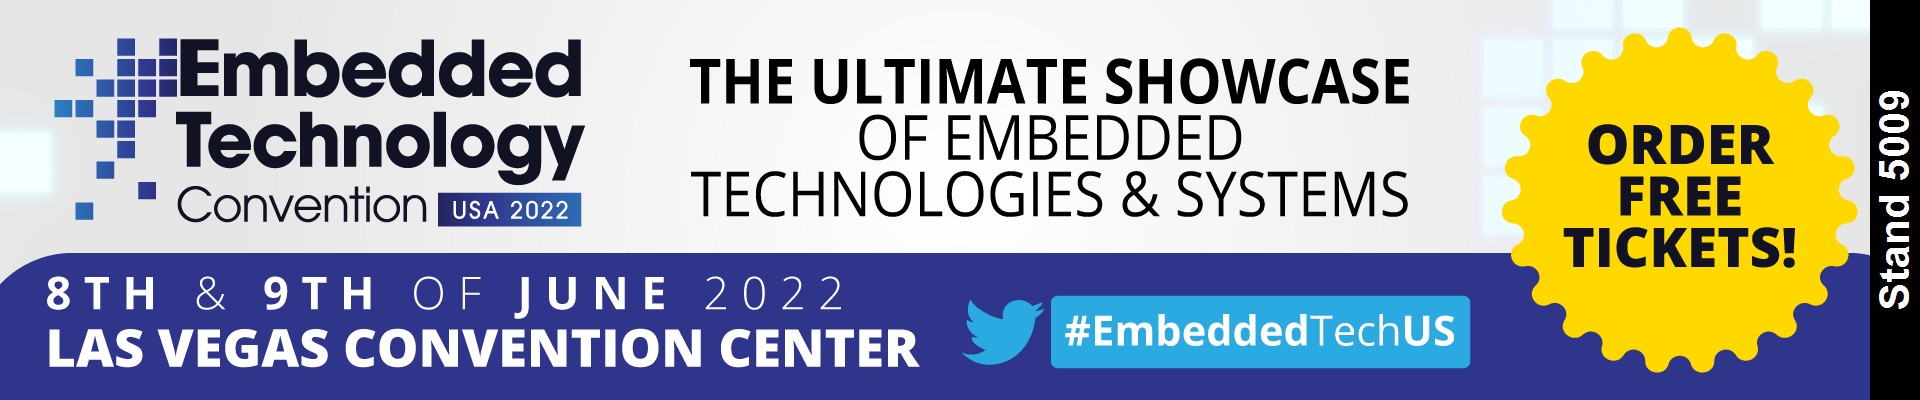 Embedded Technology Conference-USA 2022